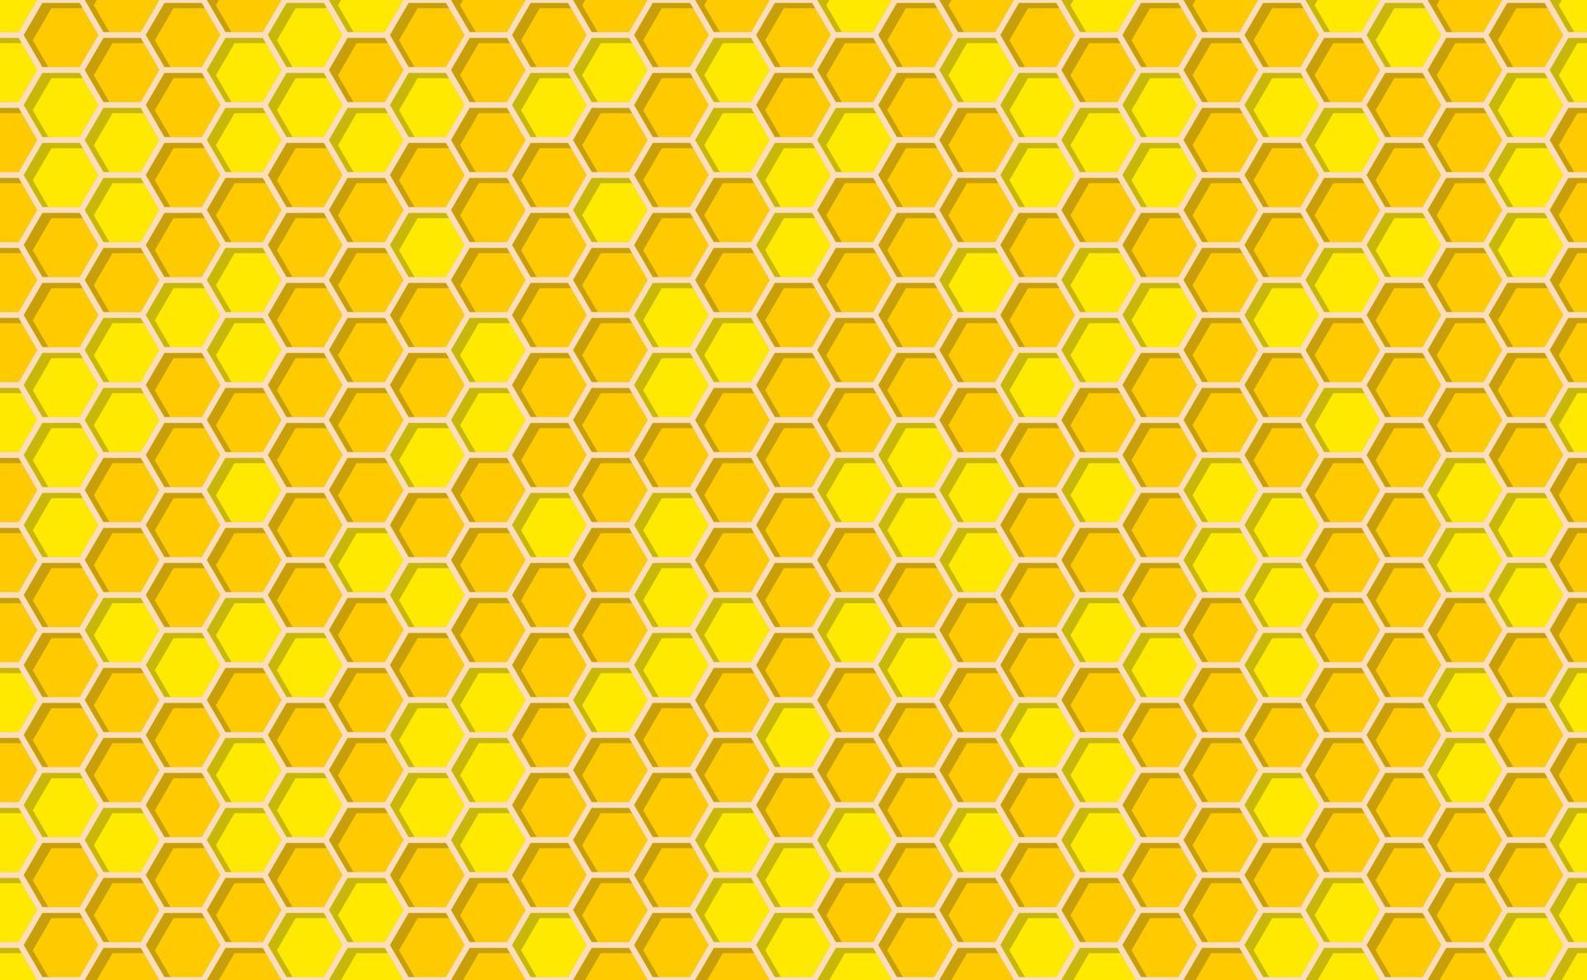 Honeycomb background. Beehive seamless pattern. Vector illustration of flat geometric texture symbol. Hexagon, hexagonal raster, sign or mosaic cell icon. Honey bee hive, golden orange yellow.